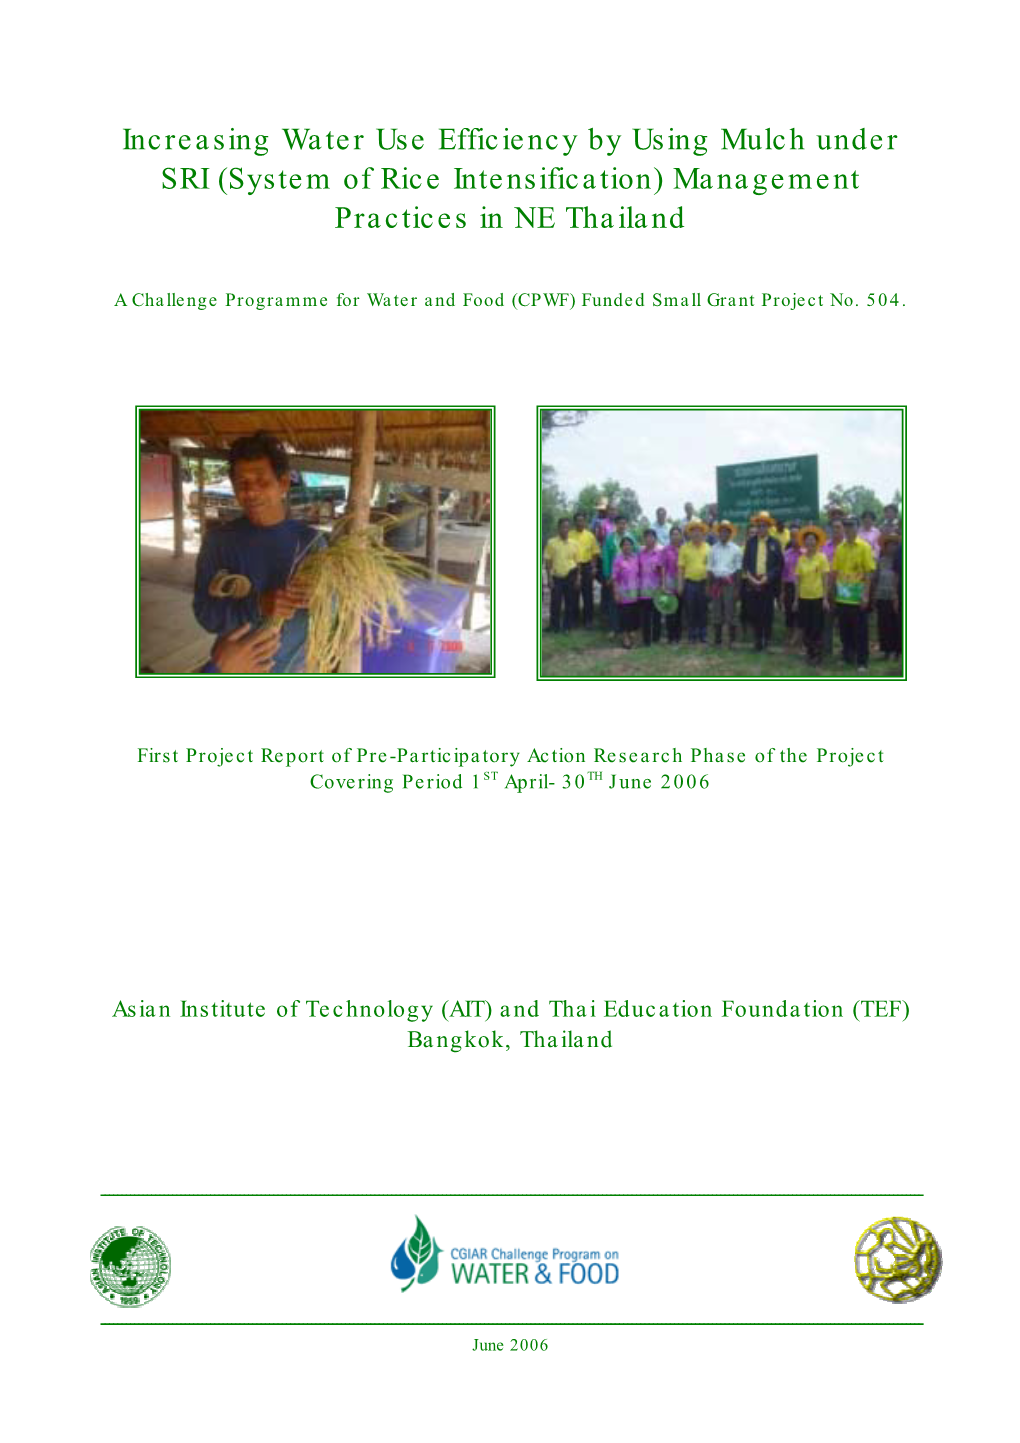 Increasing Water Use Efficiency by Using Mulch Under SRI (System of Rice Intensification) Management Practices in NE Thailand